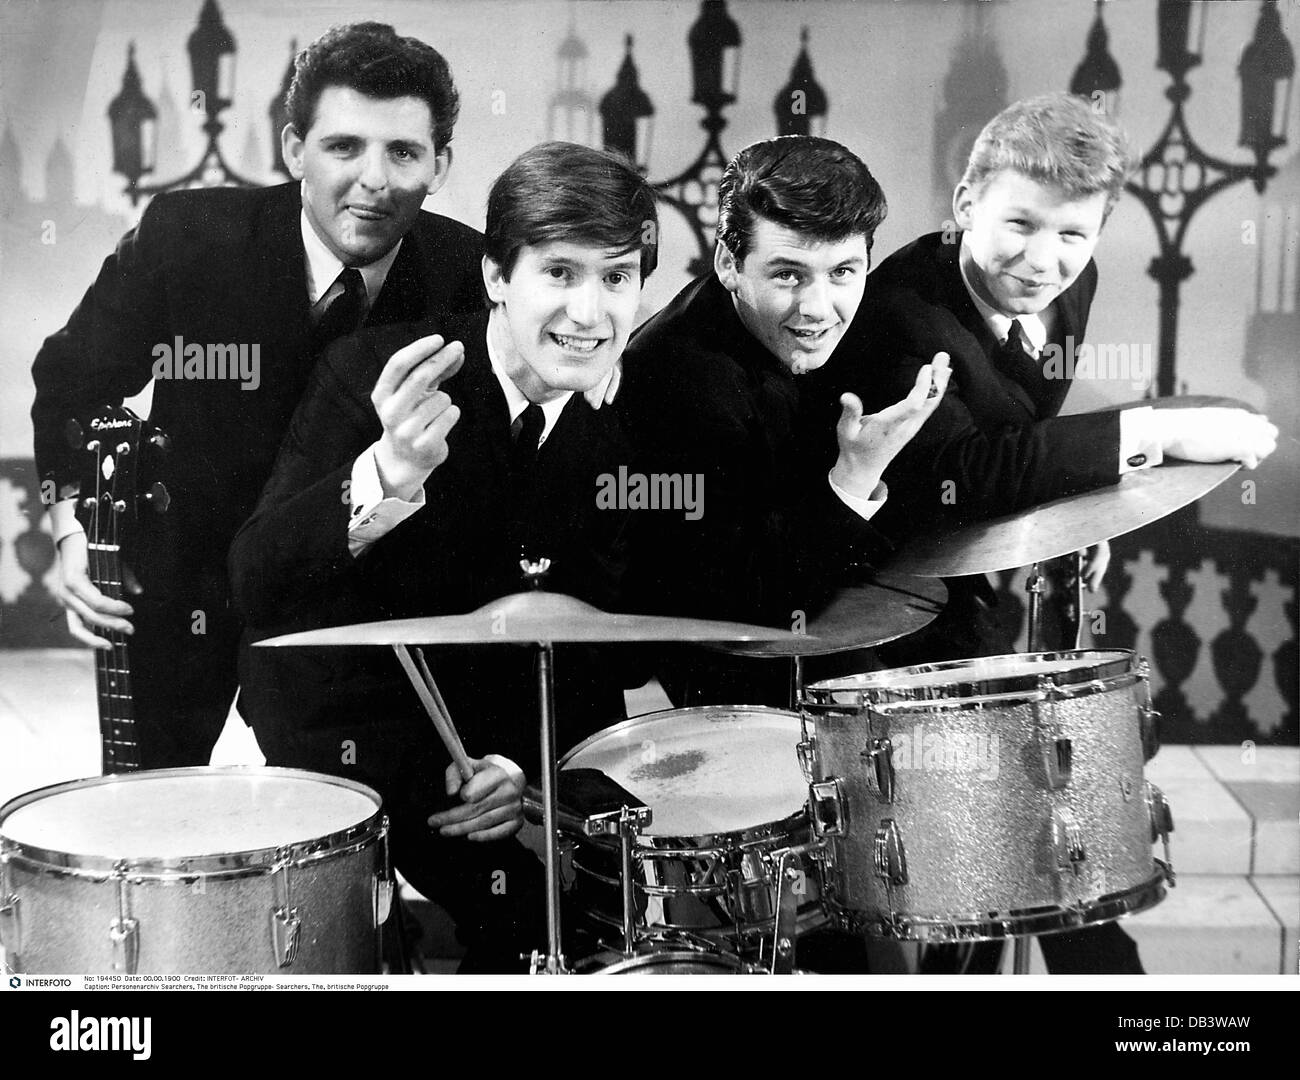 Searchers, The, founded in 1960, British Rock band, group picture, 1964, Stock Photo